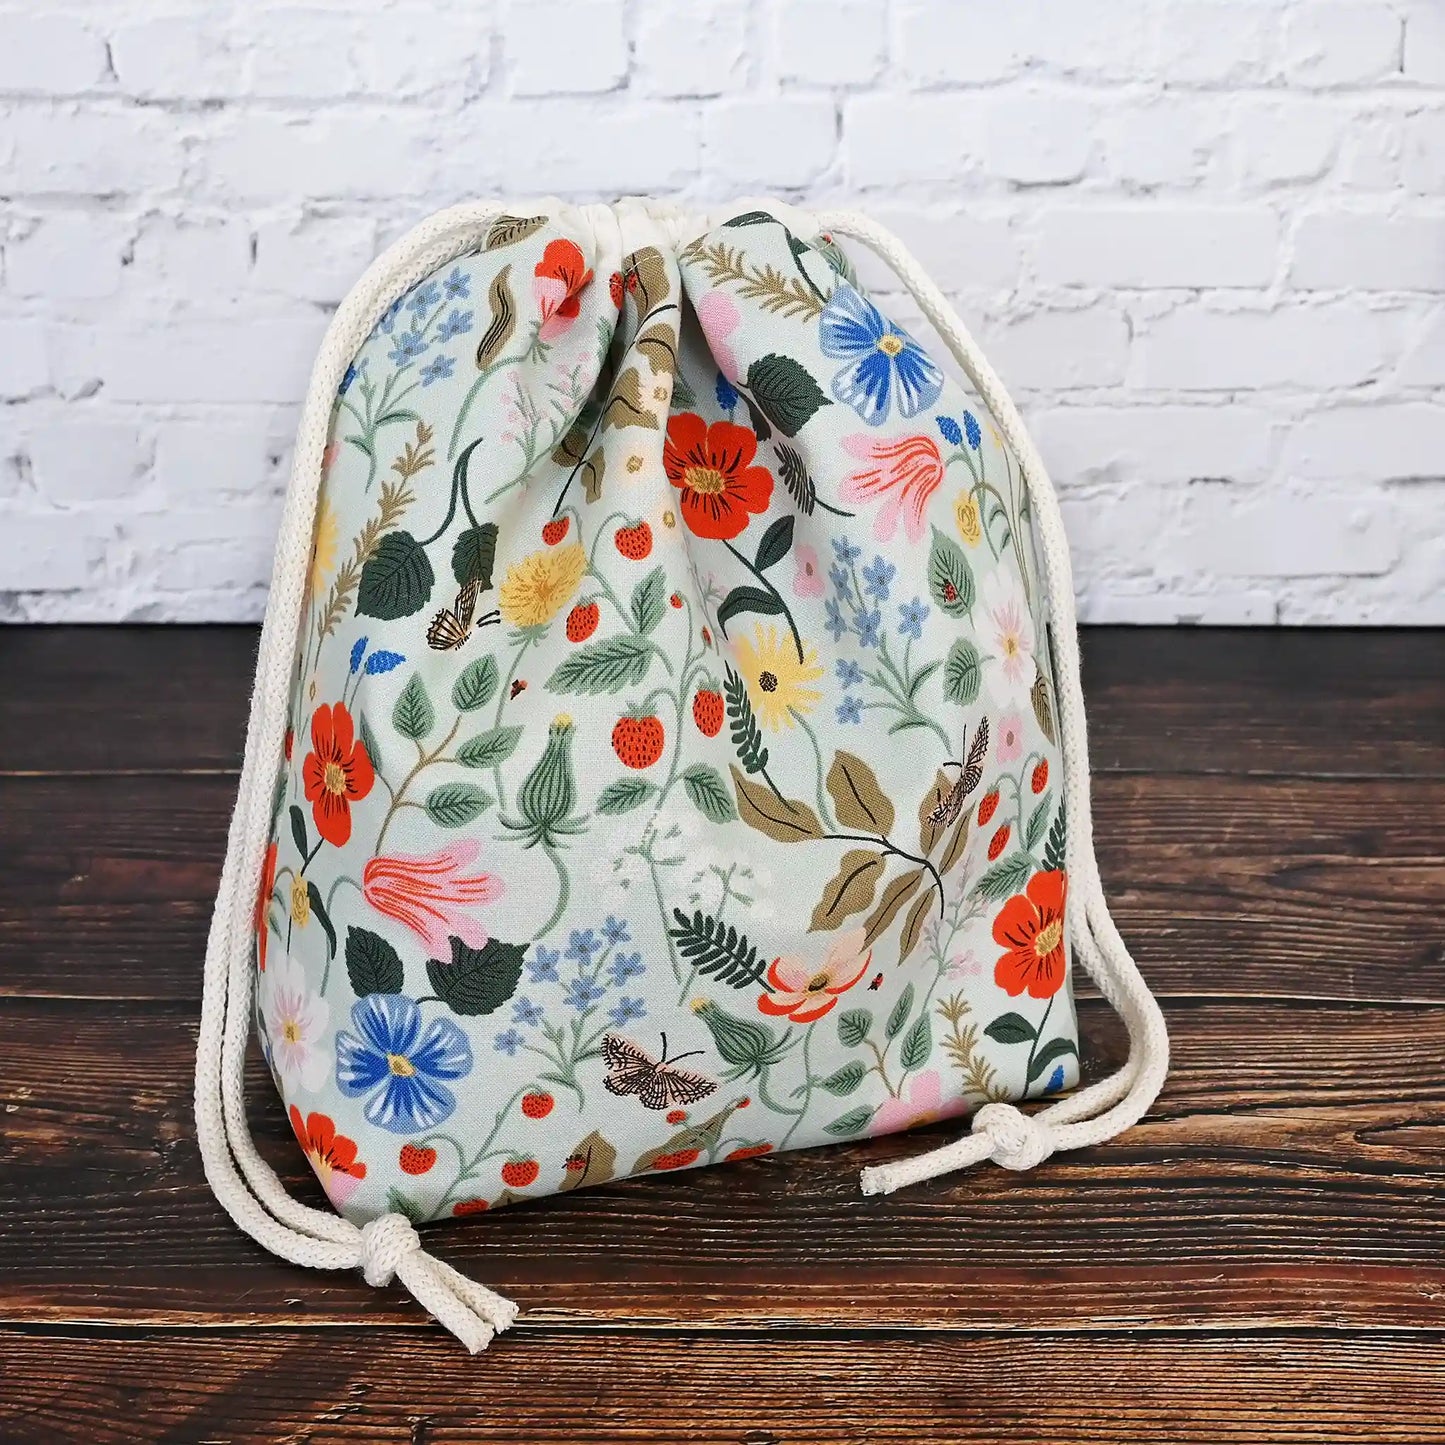 Pretty mint floral drawstring project bag made from Rifle Paper Co's Strawberry Fields Collection.  Lined in a delicate pink floral.  Made in Nova Scotia, Canada by Yellow Petal Handmade.